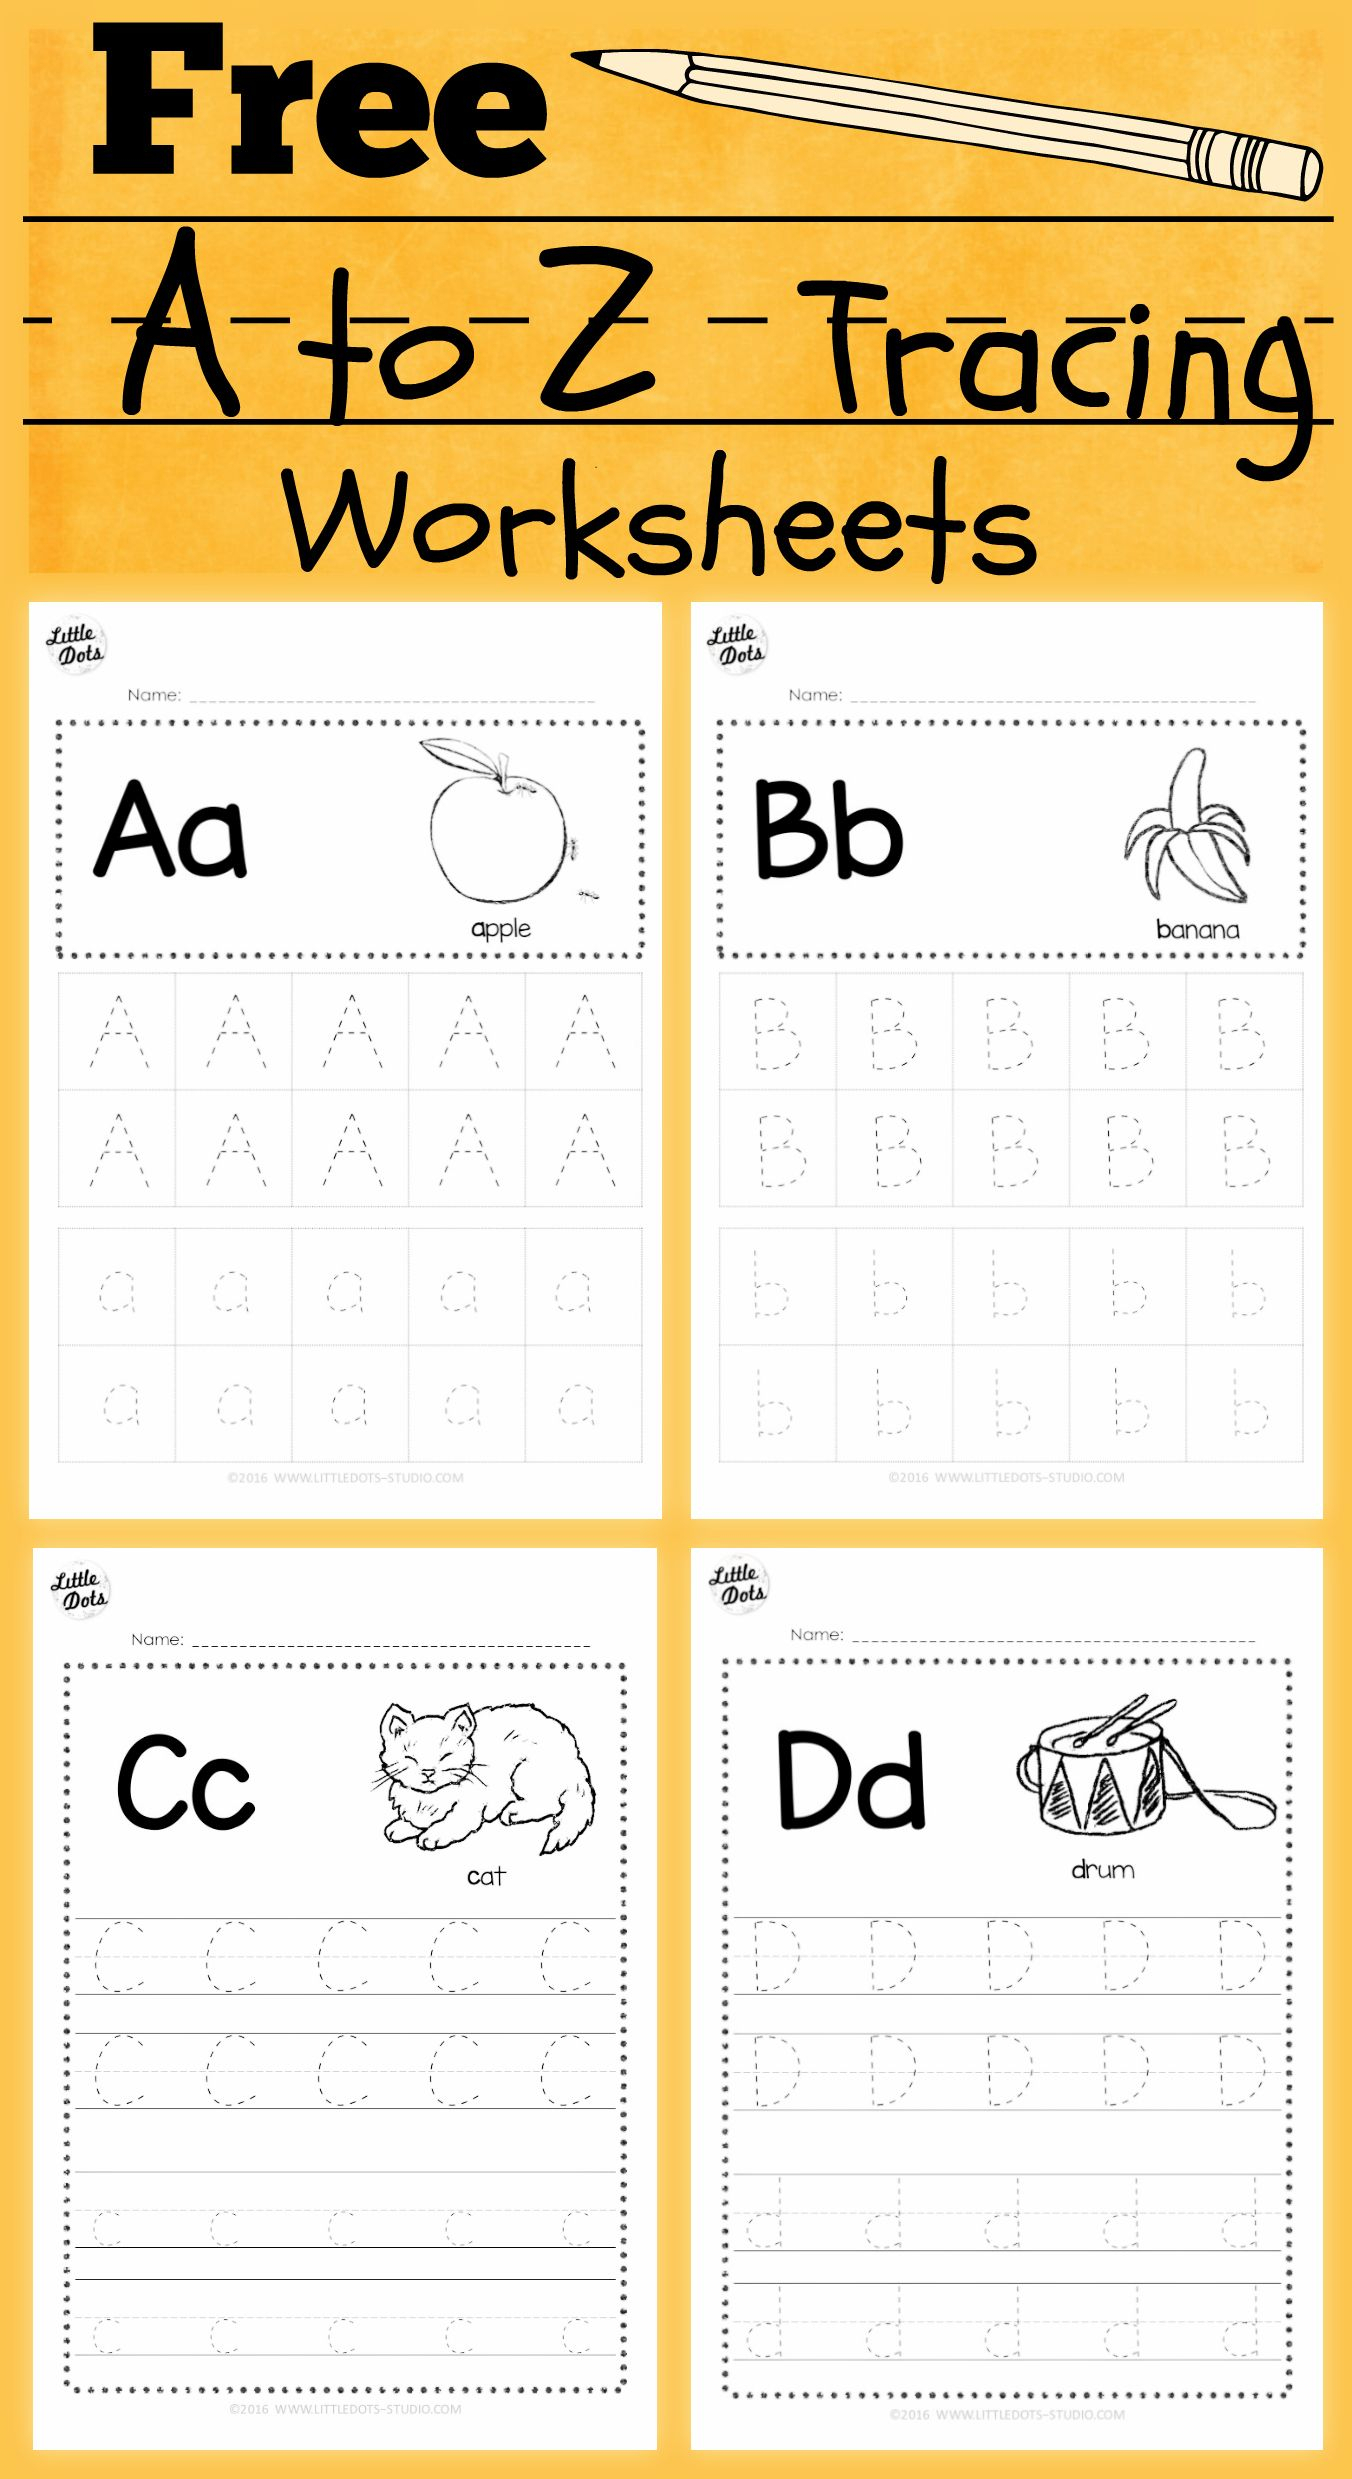 Download Free Alphabet Tracing Worksheets For Letter A To Z inside Alphabet Tracing Cards Free